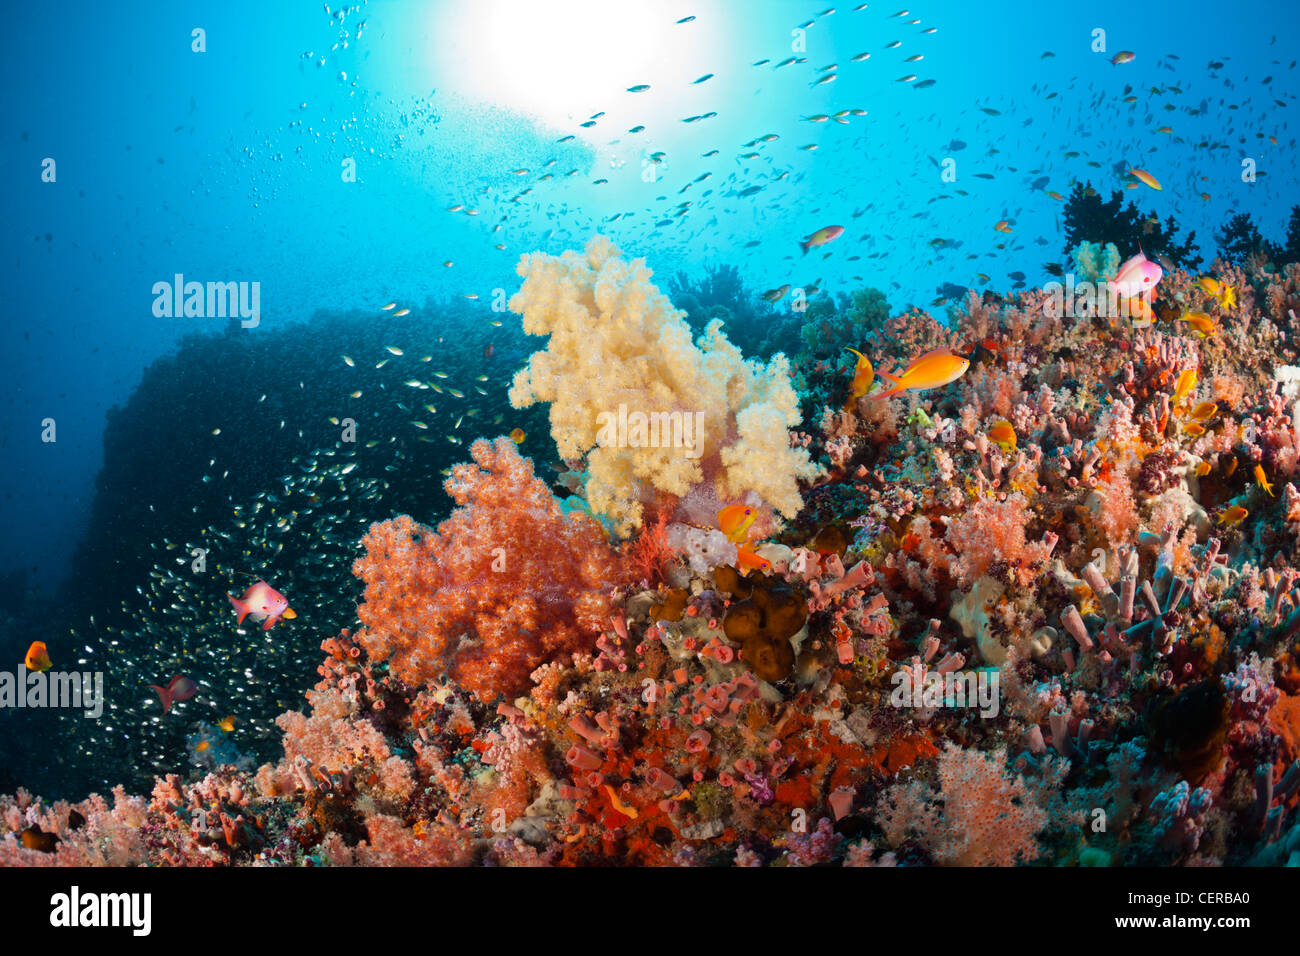 Soft Coral Reef, North Male Atoll, Indian Ocean, Maldives Stock Photo